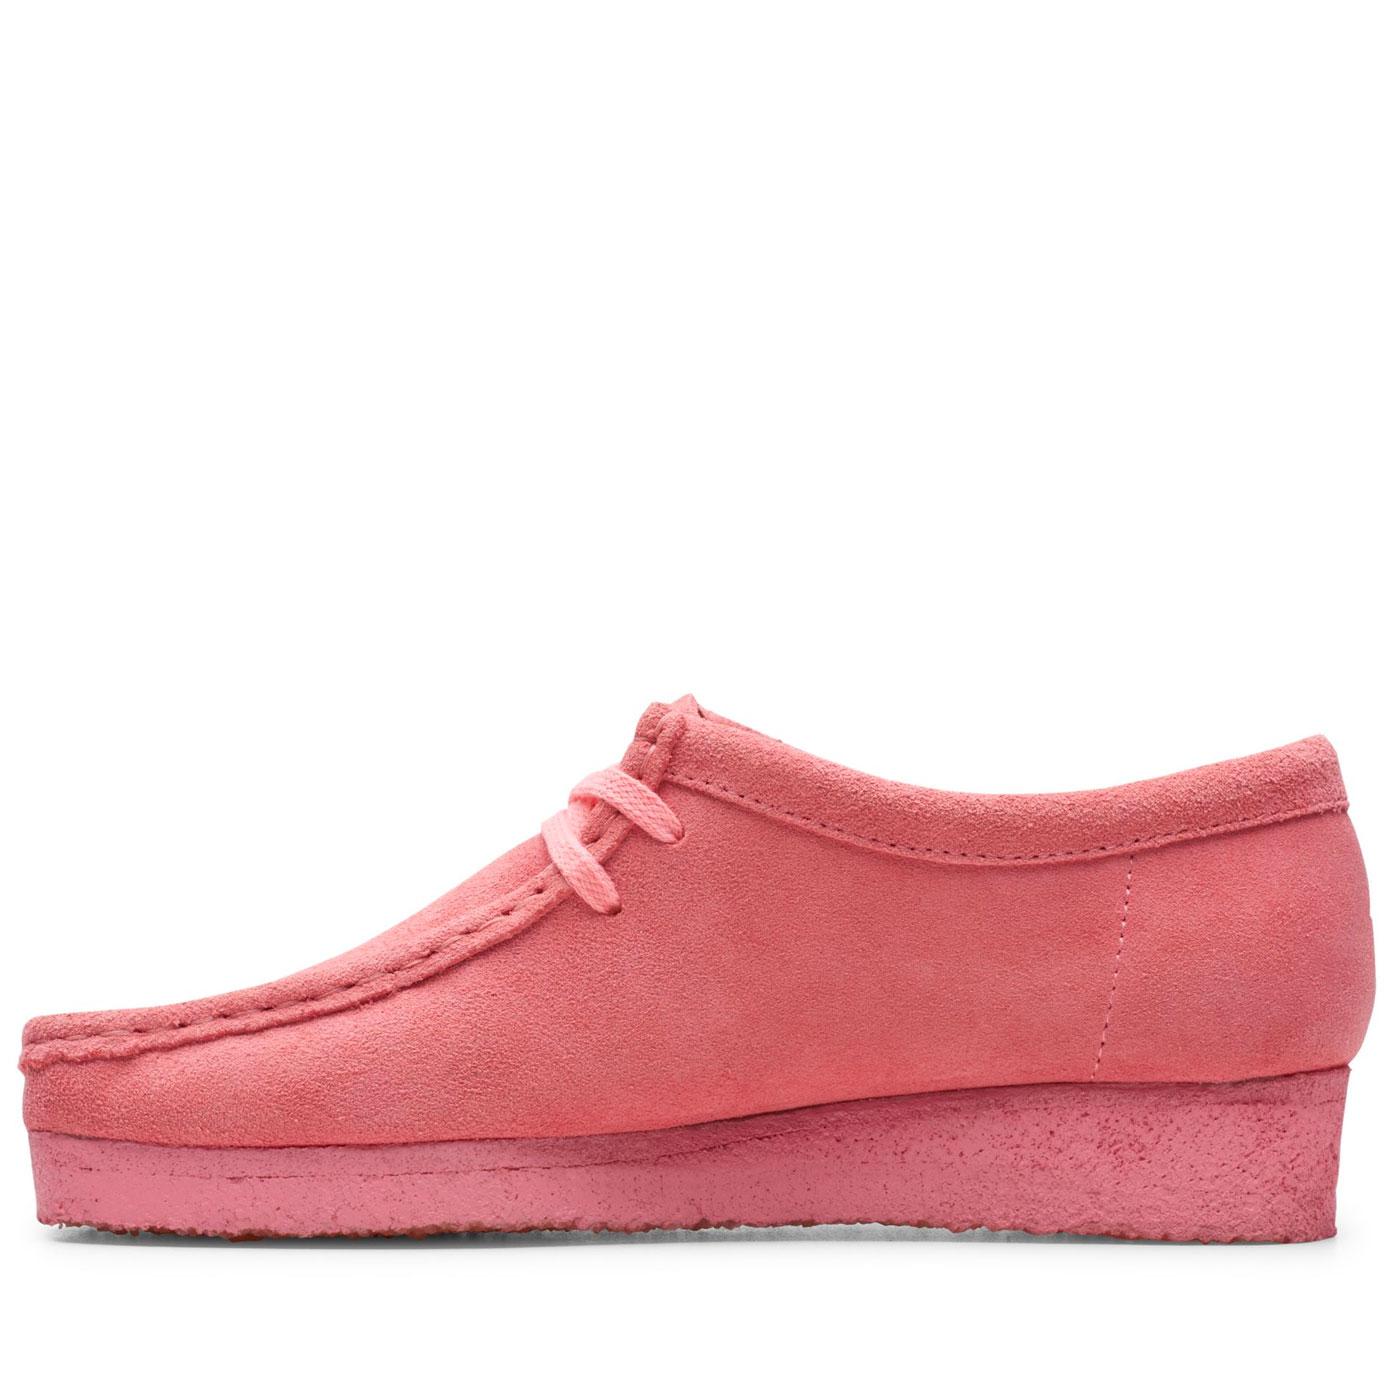 CLARKS Wallabee Women's Retro Suede Shoes in Bright Pink